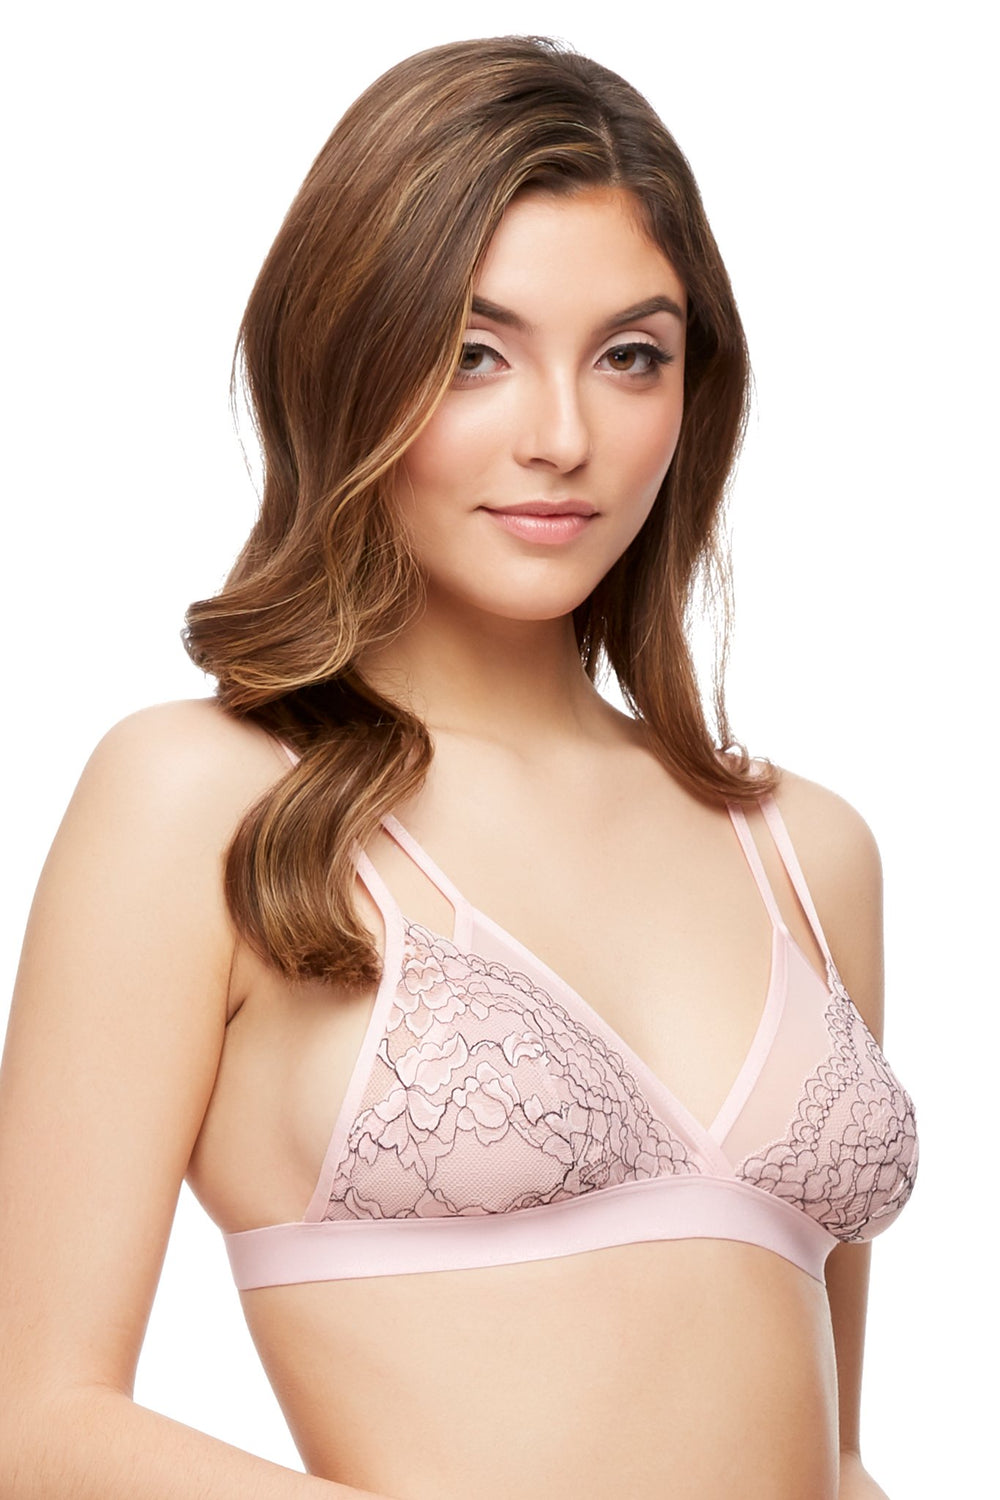 QCEMENI Plus Size Women's Bras Breathable Lace Bralettes Snap Front Push Up  Brassieres Underwear Wirefree V Neck T-Shirt Bra : : Clothing